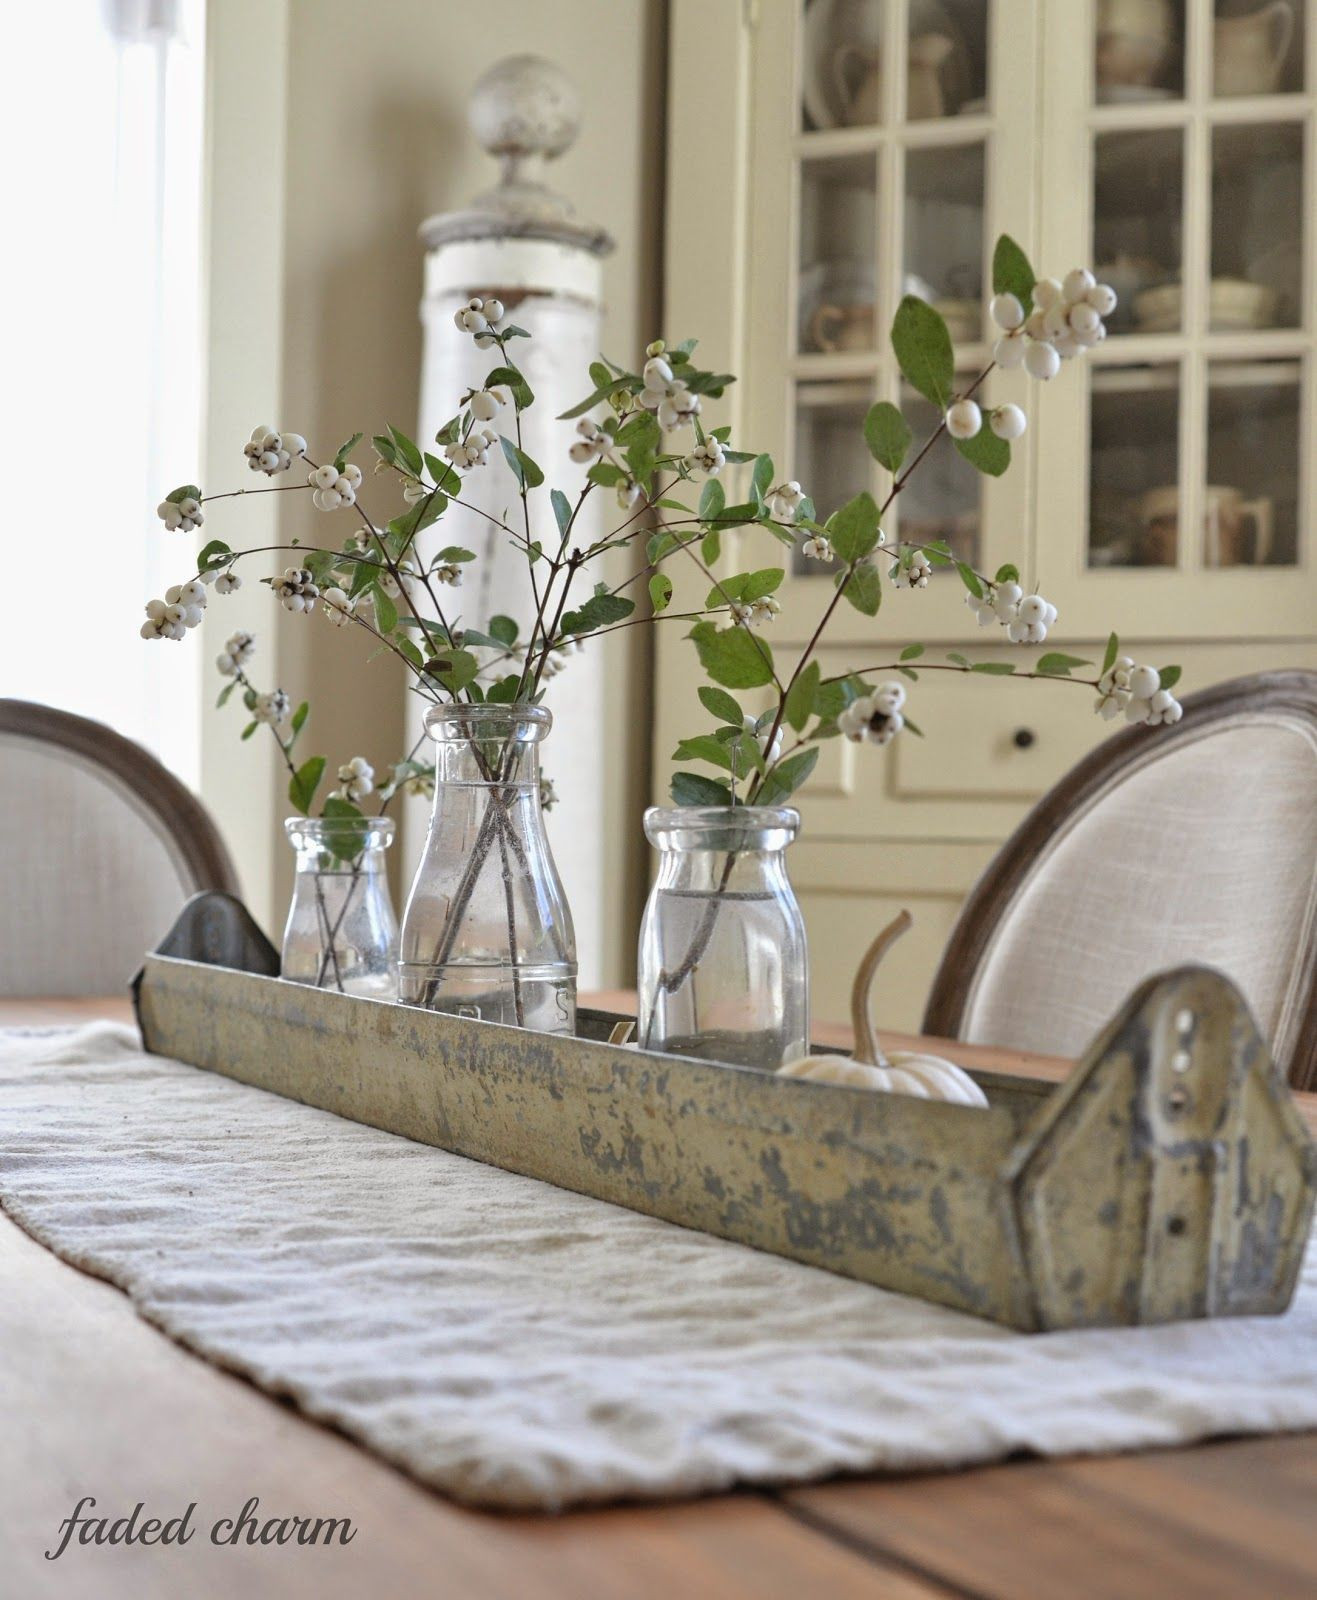 Rustic Kitchen Table Centerpieces
 Pin by KetoInCourt on Home Sweet Home